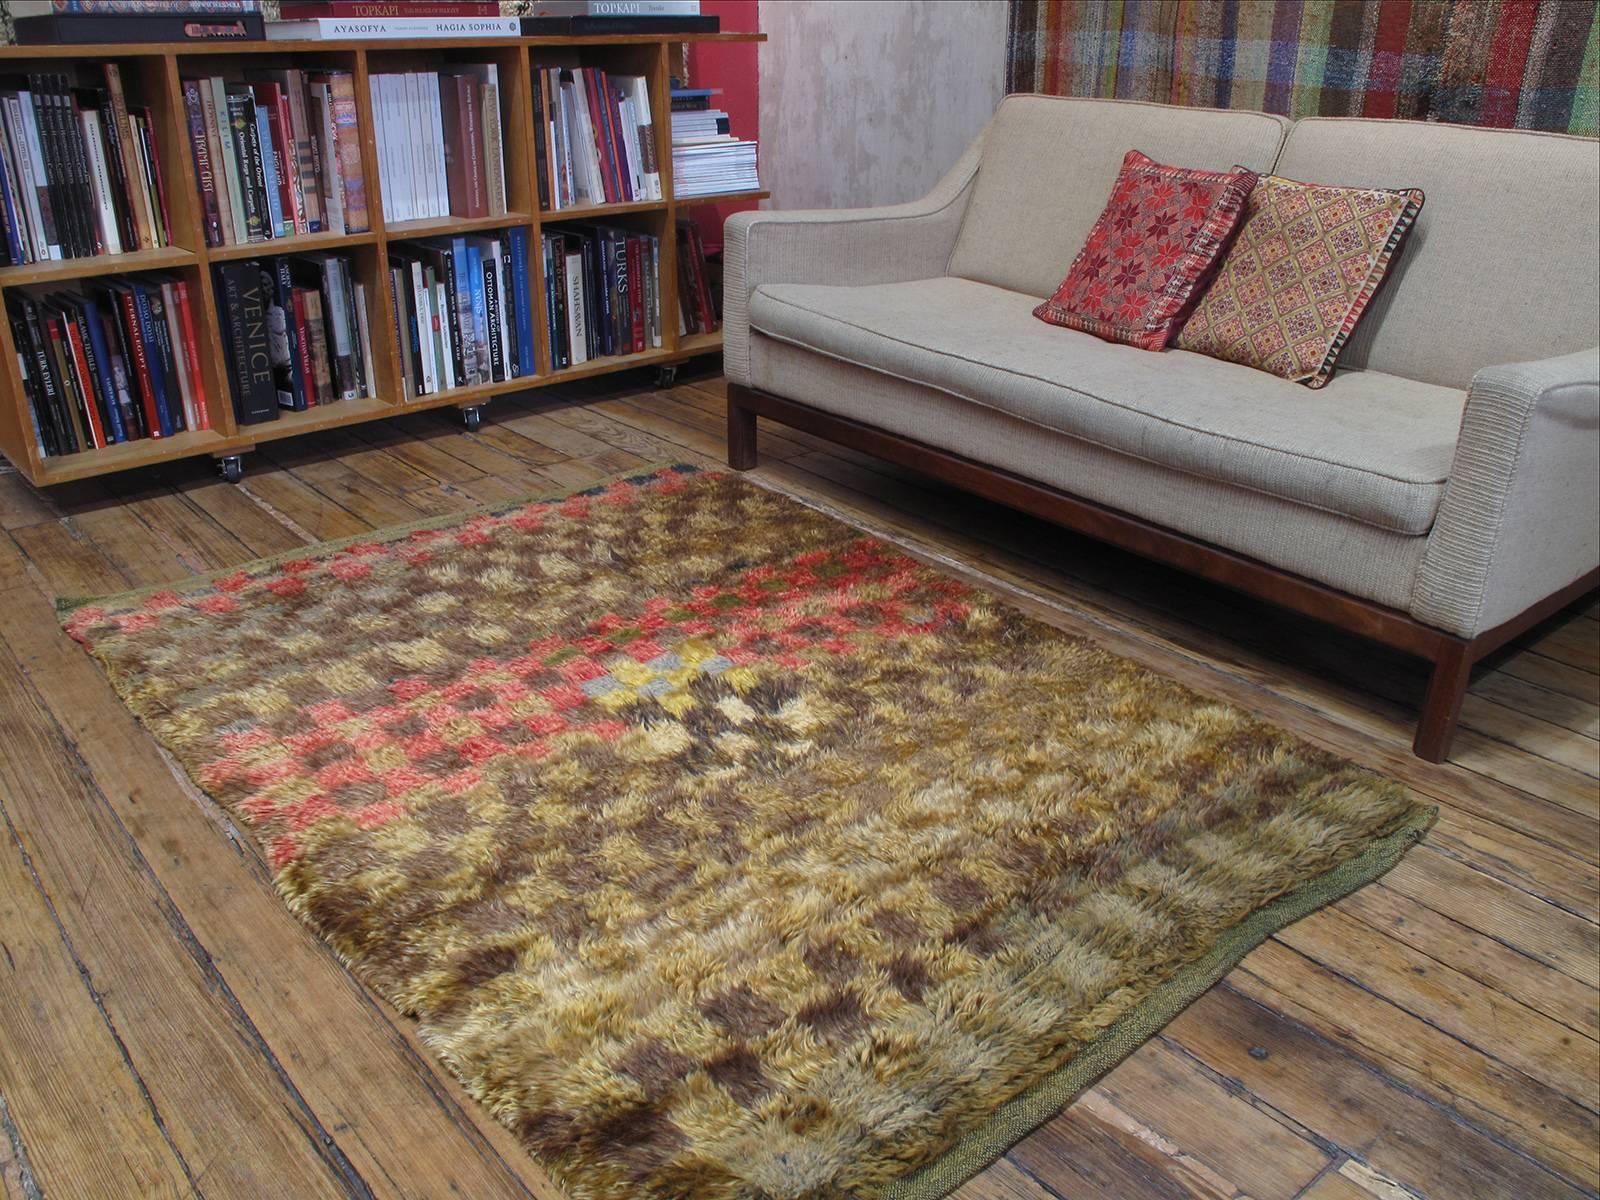 Chessboard Angora Tulu rug. A wonderful old rug from Central Turkey, woven in silky, lustrous angora goat hair, i.e. mohair, with superb texture and patina, indicating good age. The chessboard design is well-known, but the color palette is quite